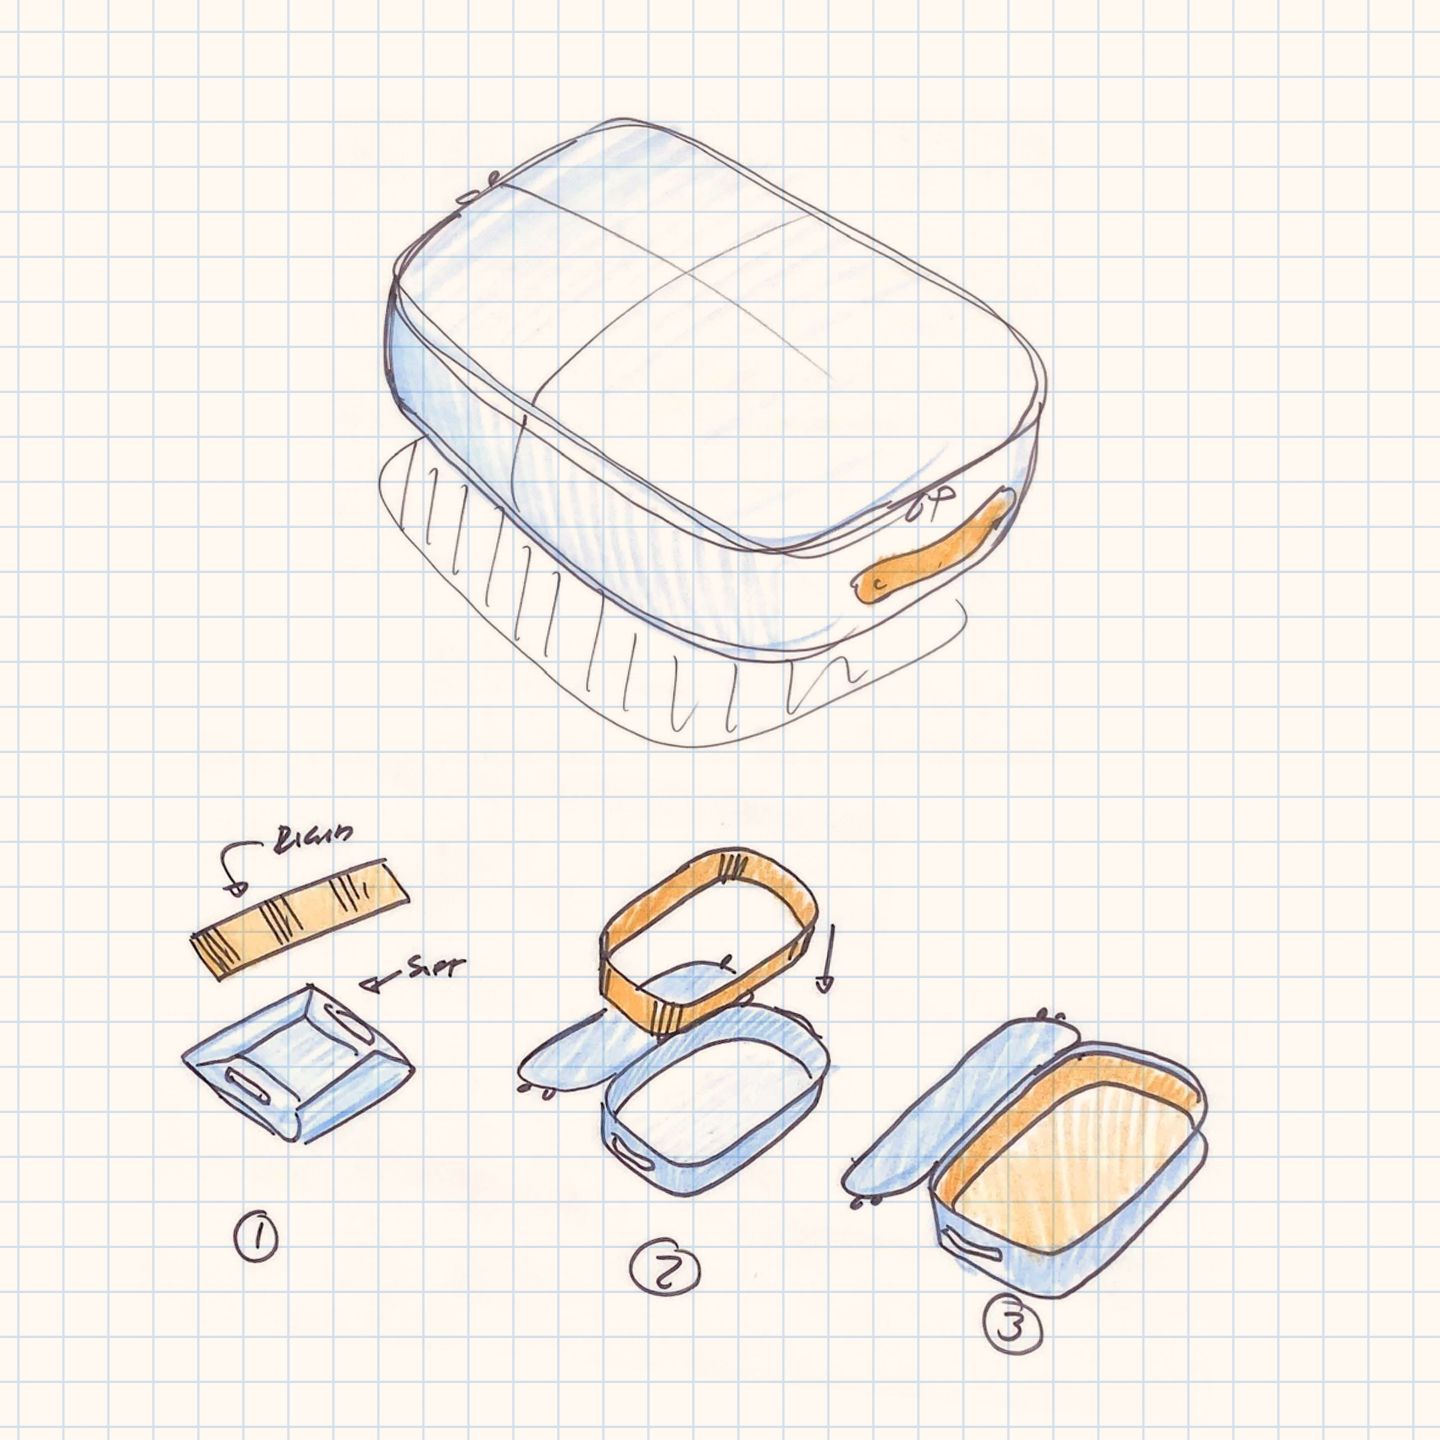 A handful of sketches of the Underbed Storage on grid paper.